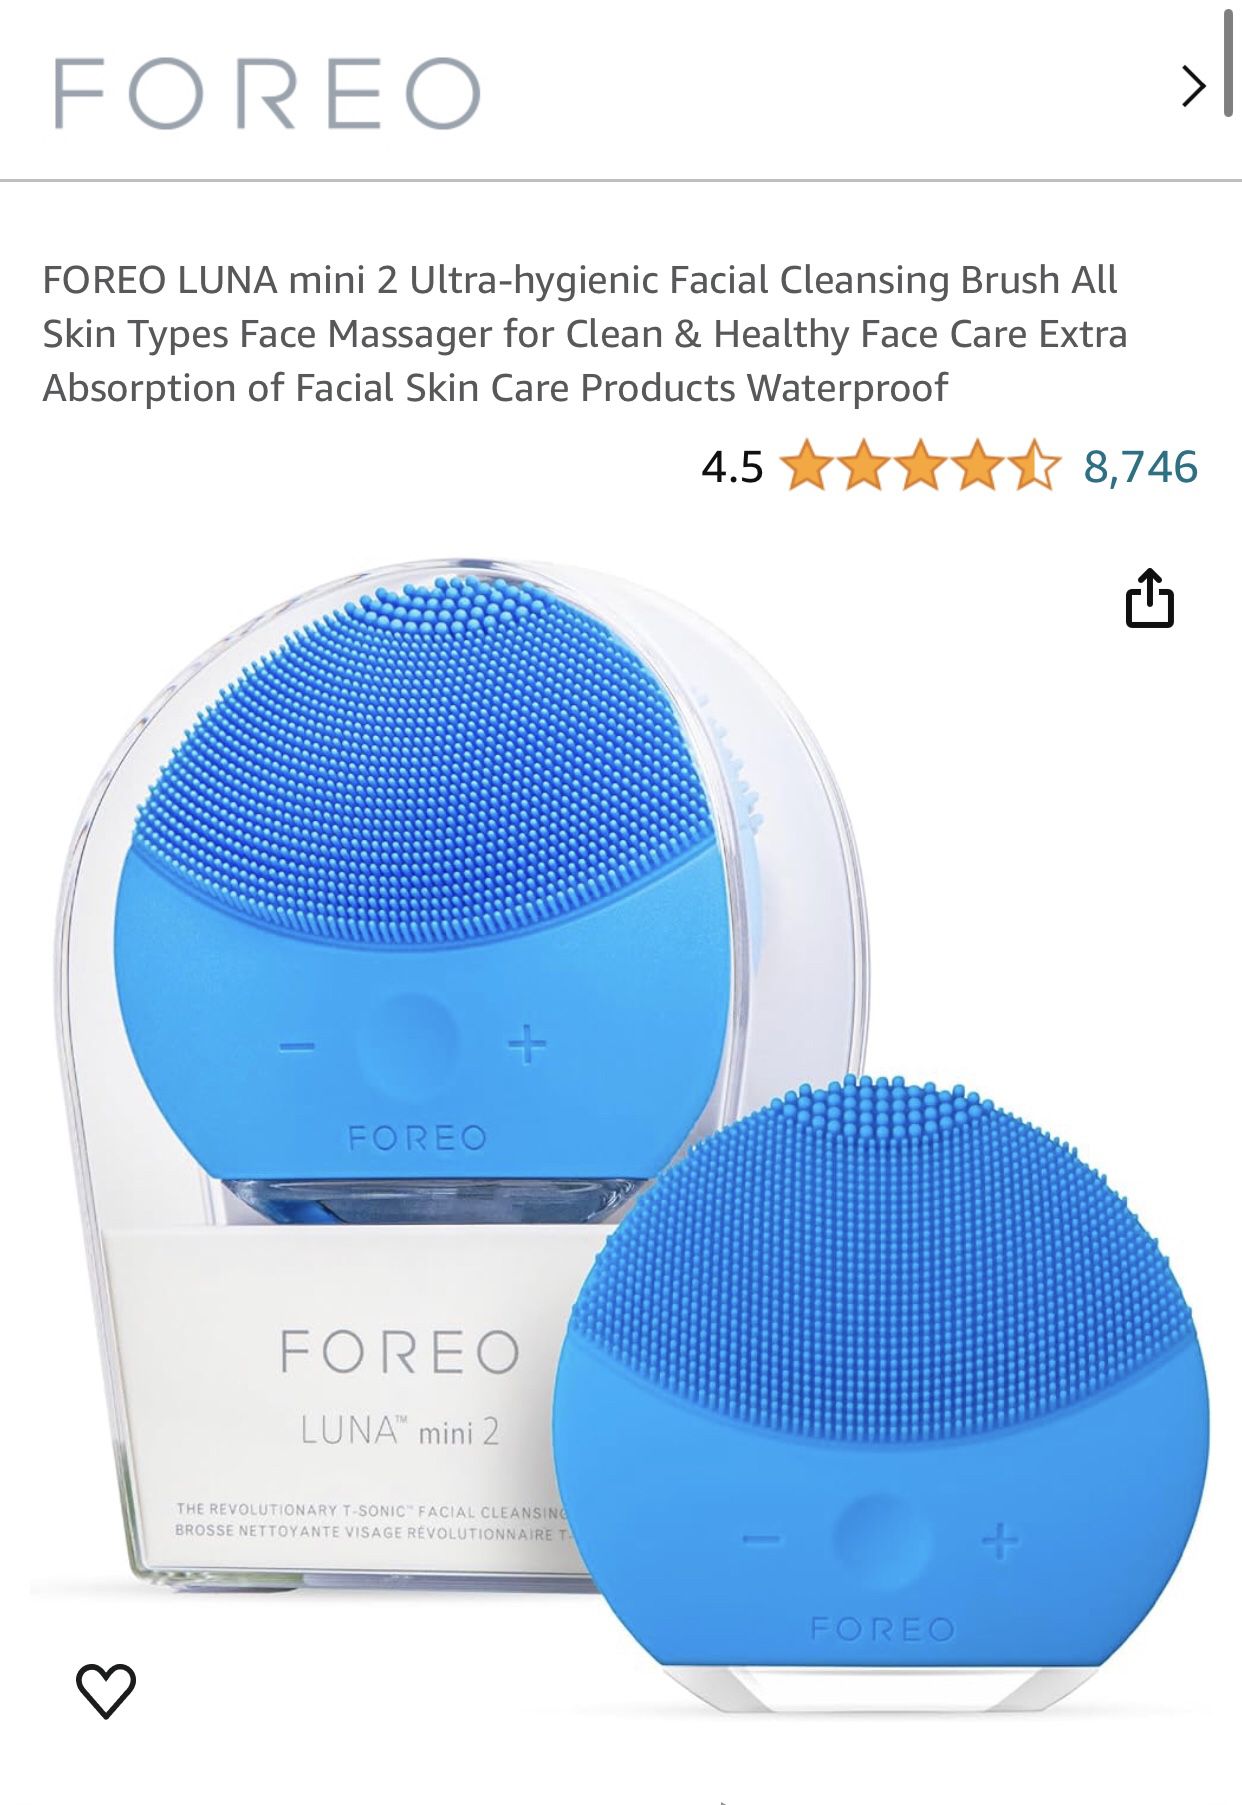 FOREO LUNA mini 2 Ultra-hygienic Facial Cleansing Brush All Skin Types Face Massager for Clean & Healthy Face Care Extra Absorption of Facial Skin Car